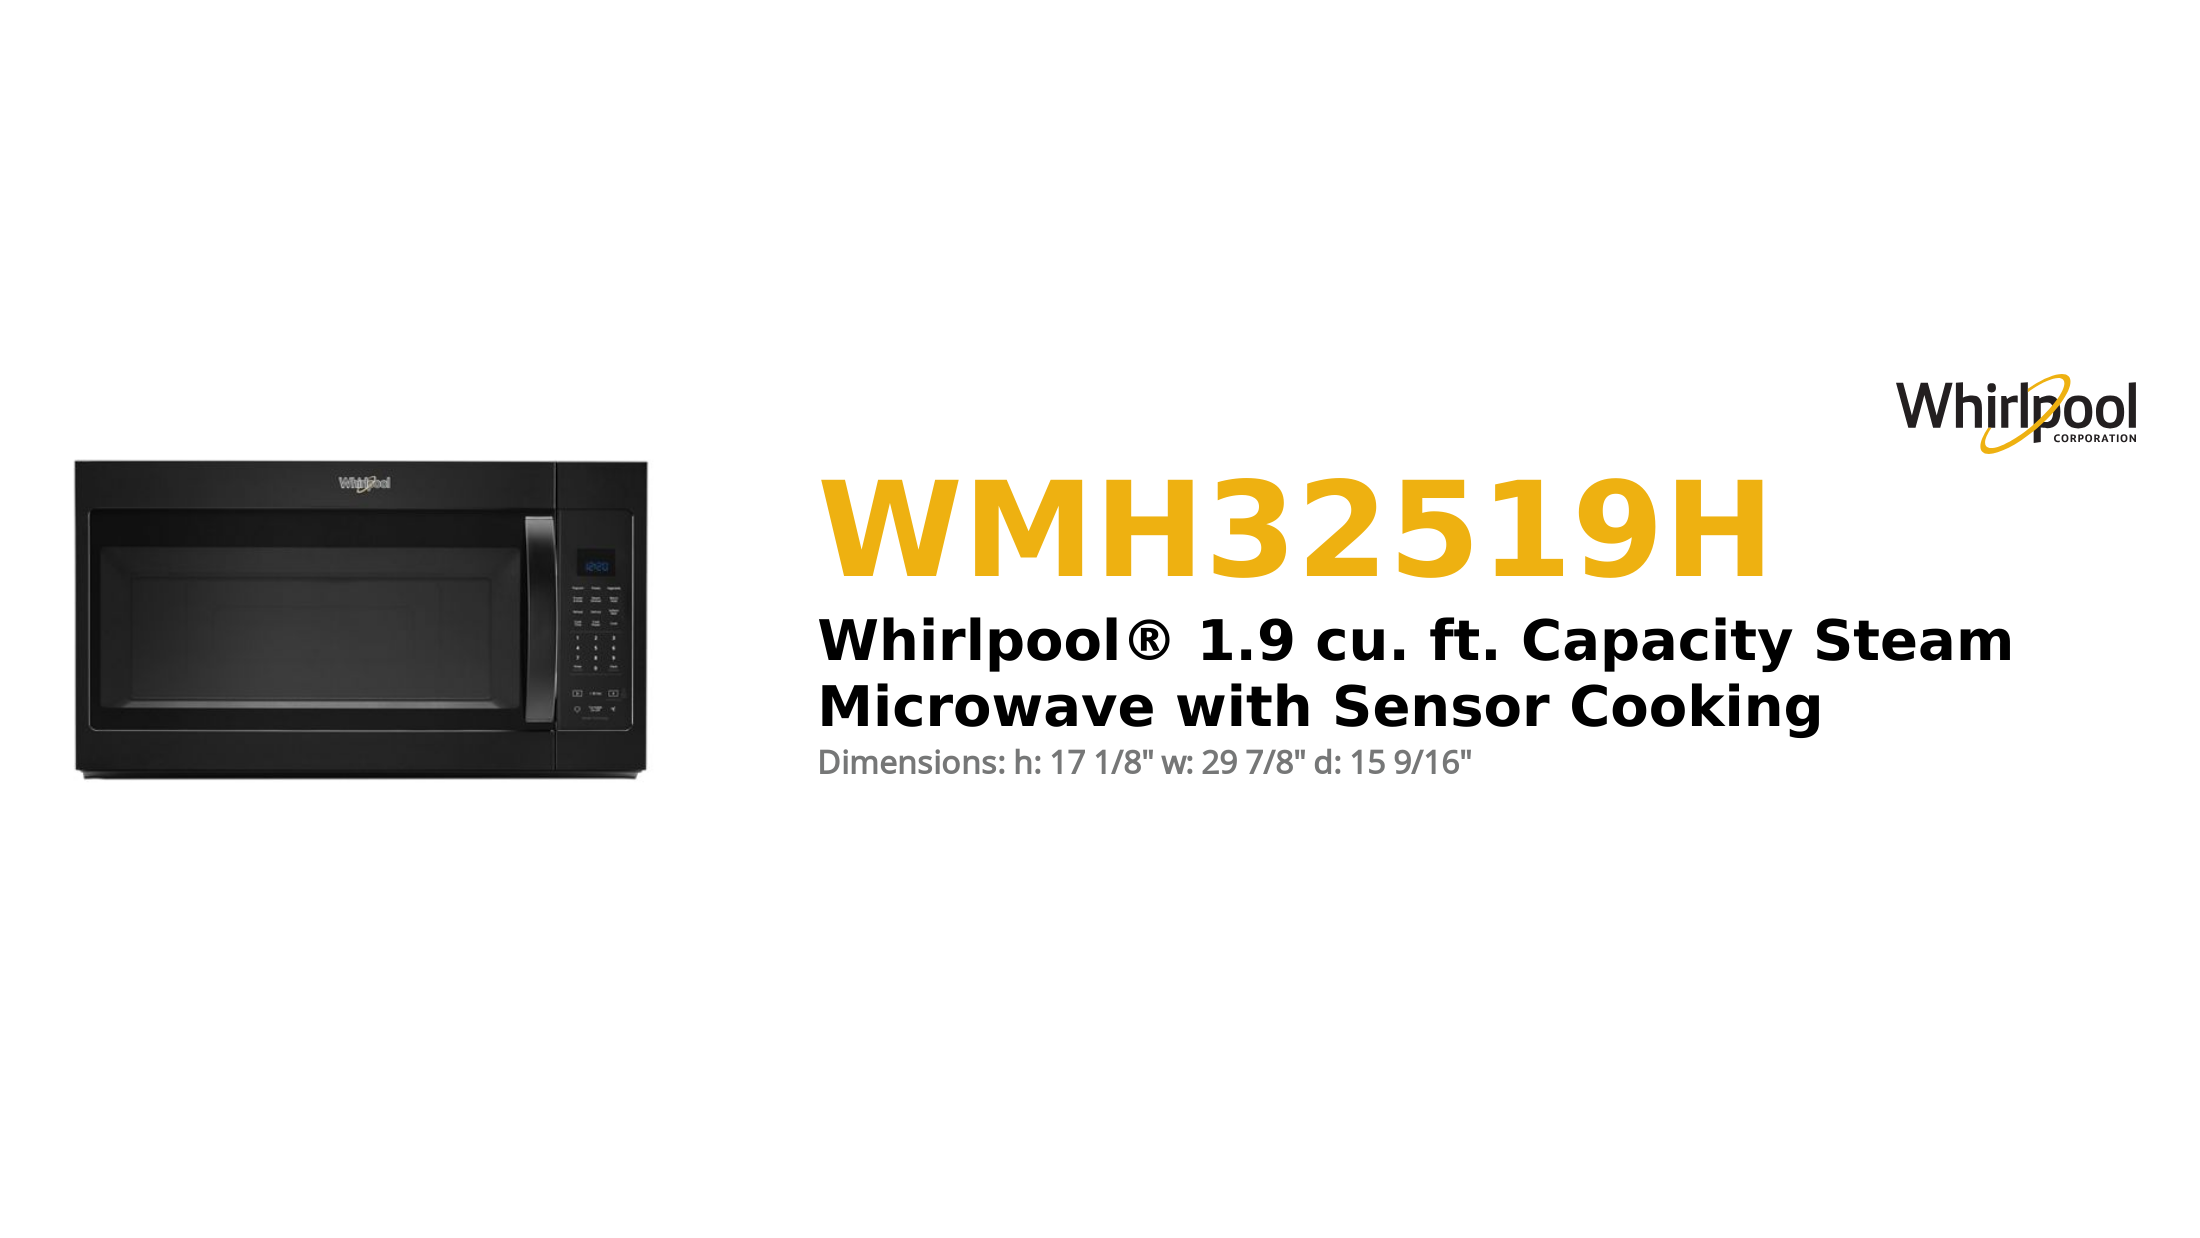 Whirlpool® 1.9 cu. ft. Capacity Steam Microwave with Sensor Cooking